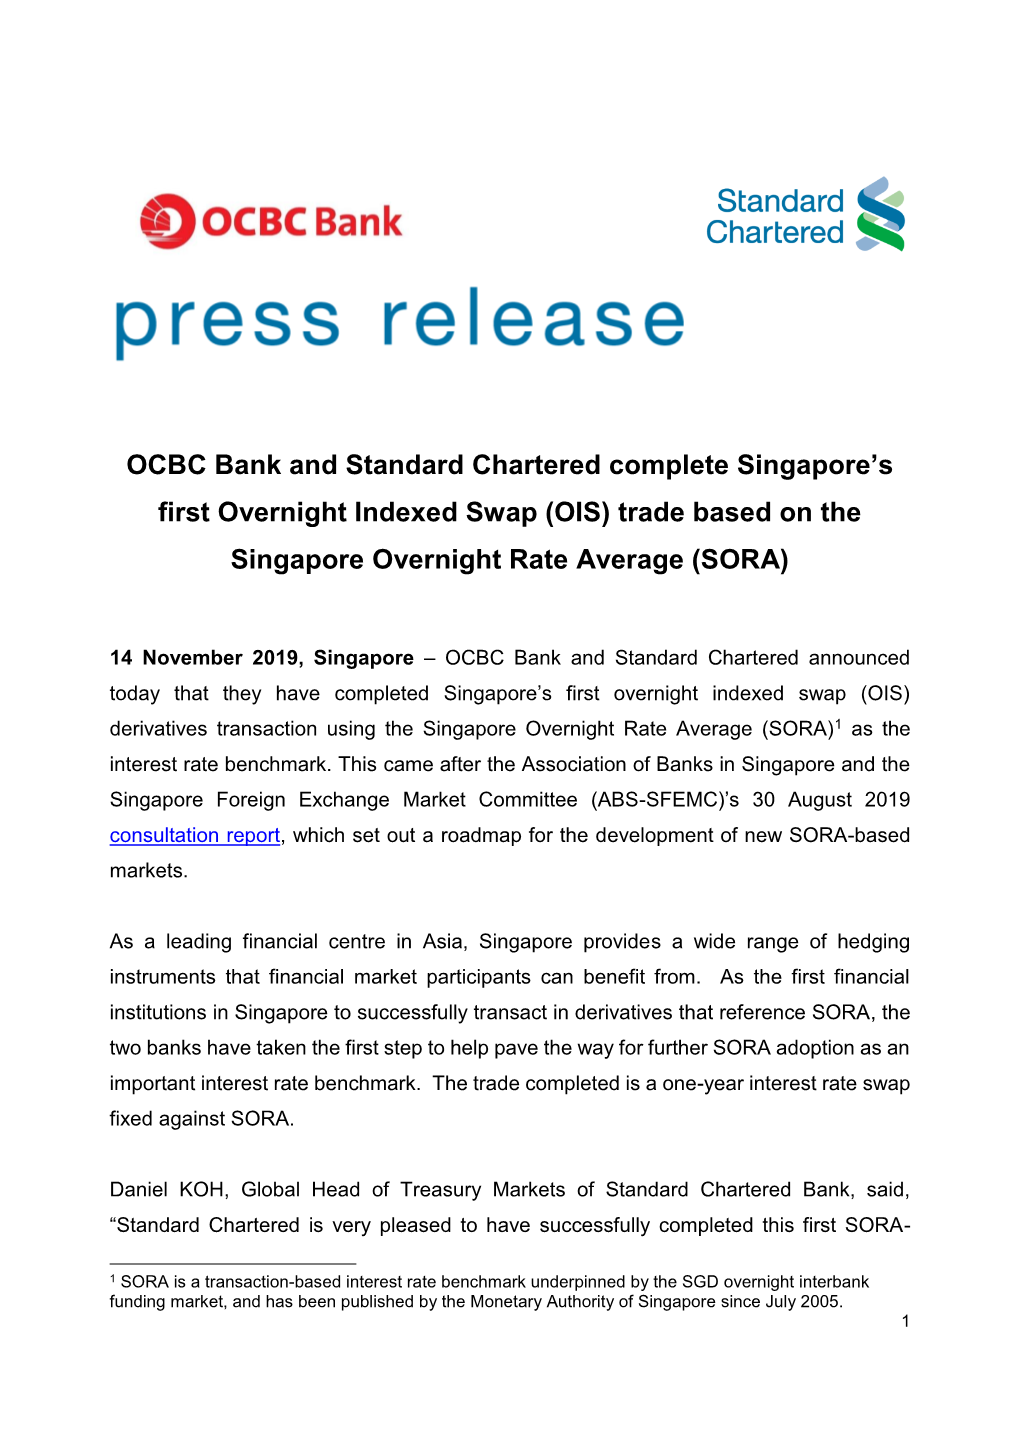 OCBC Bank and Standard Chartered Complete Singapore's First